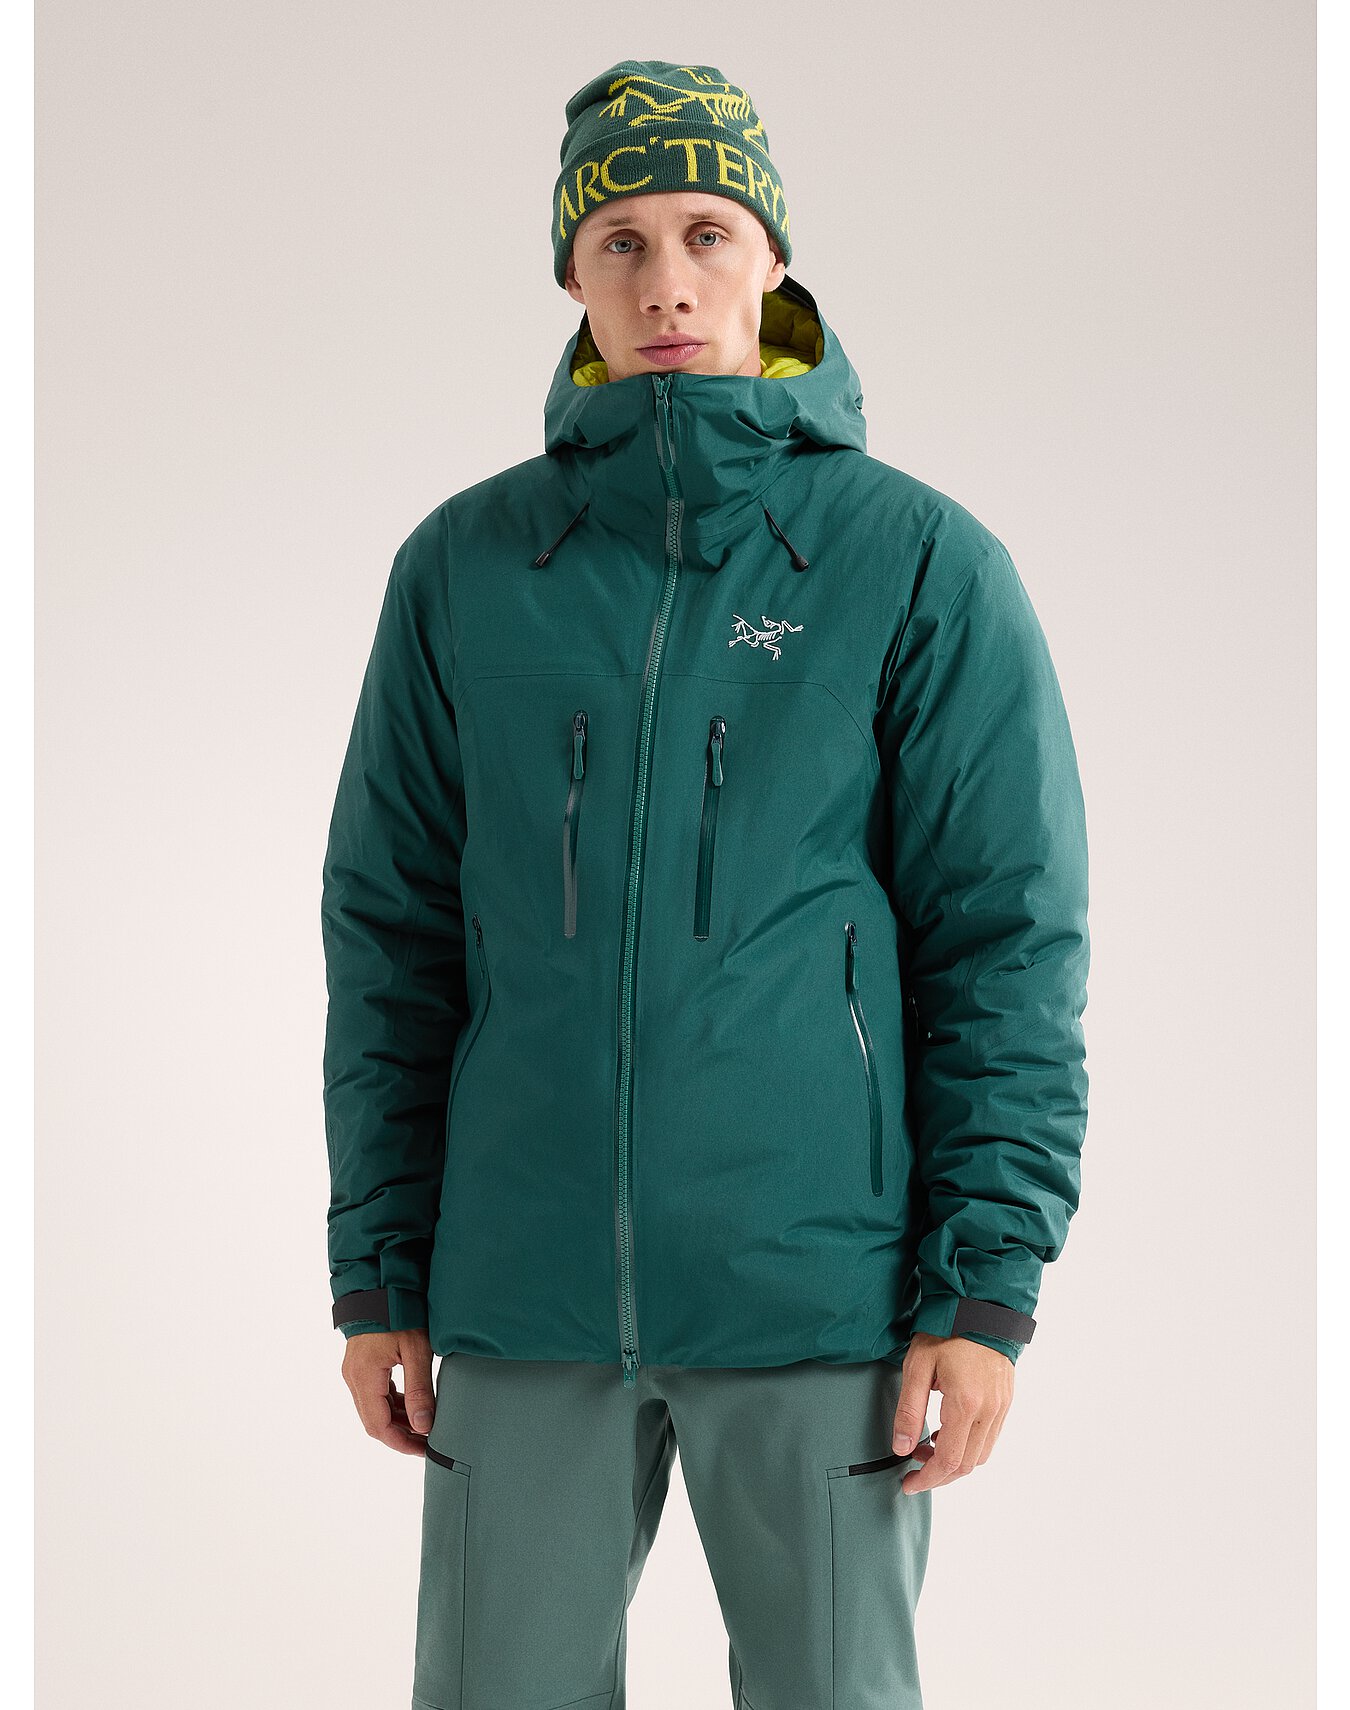 Beta Down Insulated Jacket Men's | Arc'teryx Outlet